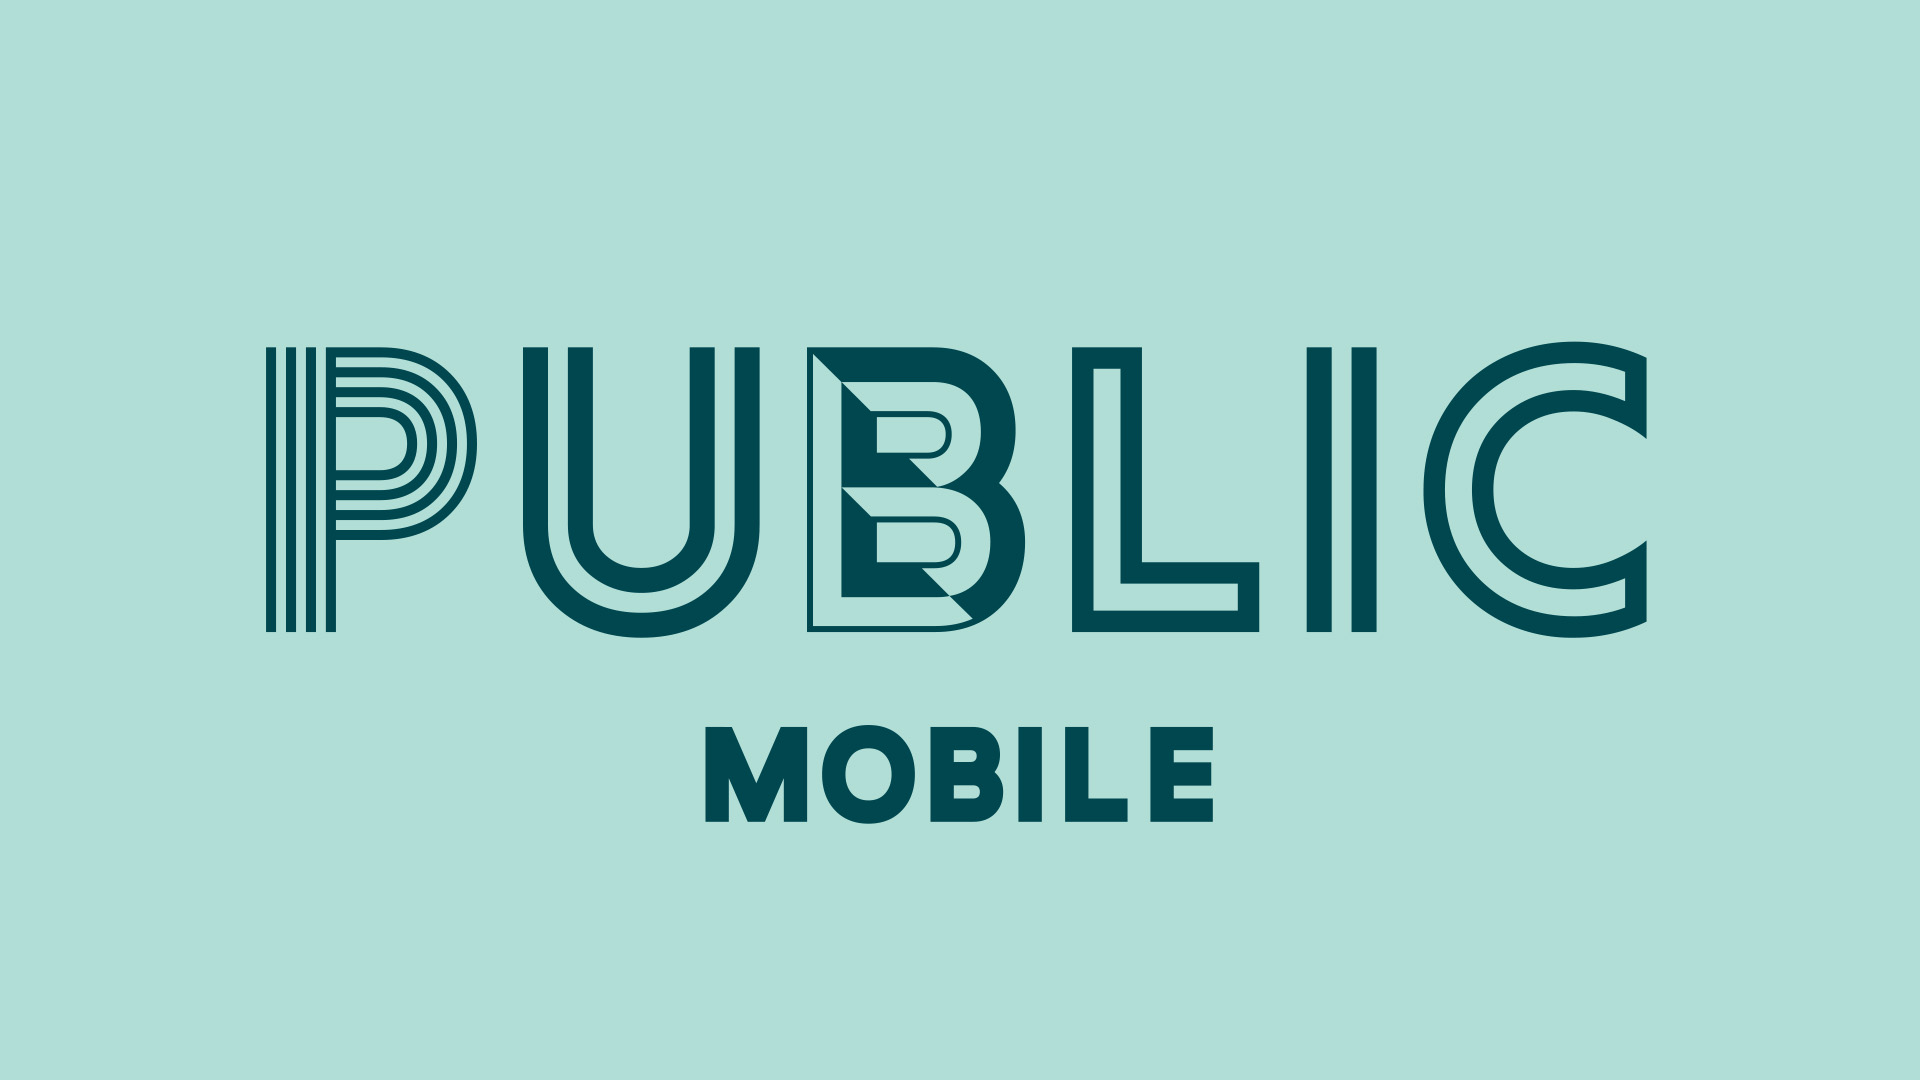 We’re For You: Public Mobile unveils refreshed brand identity and new